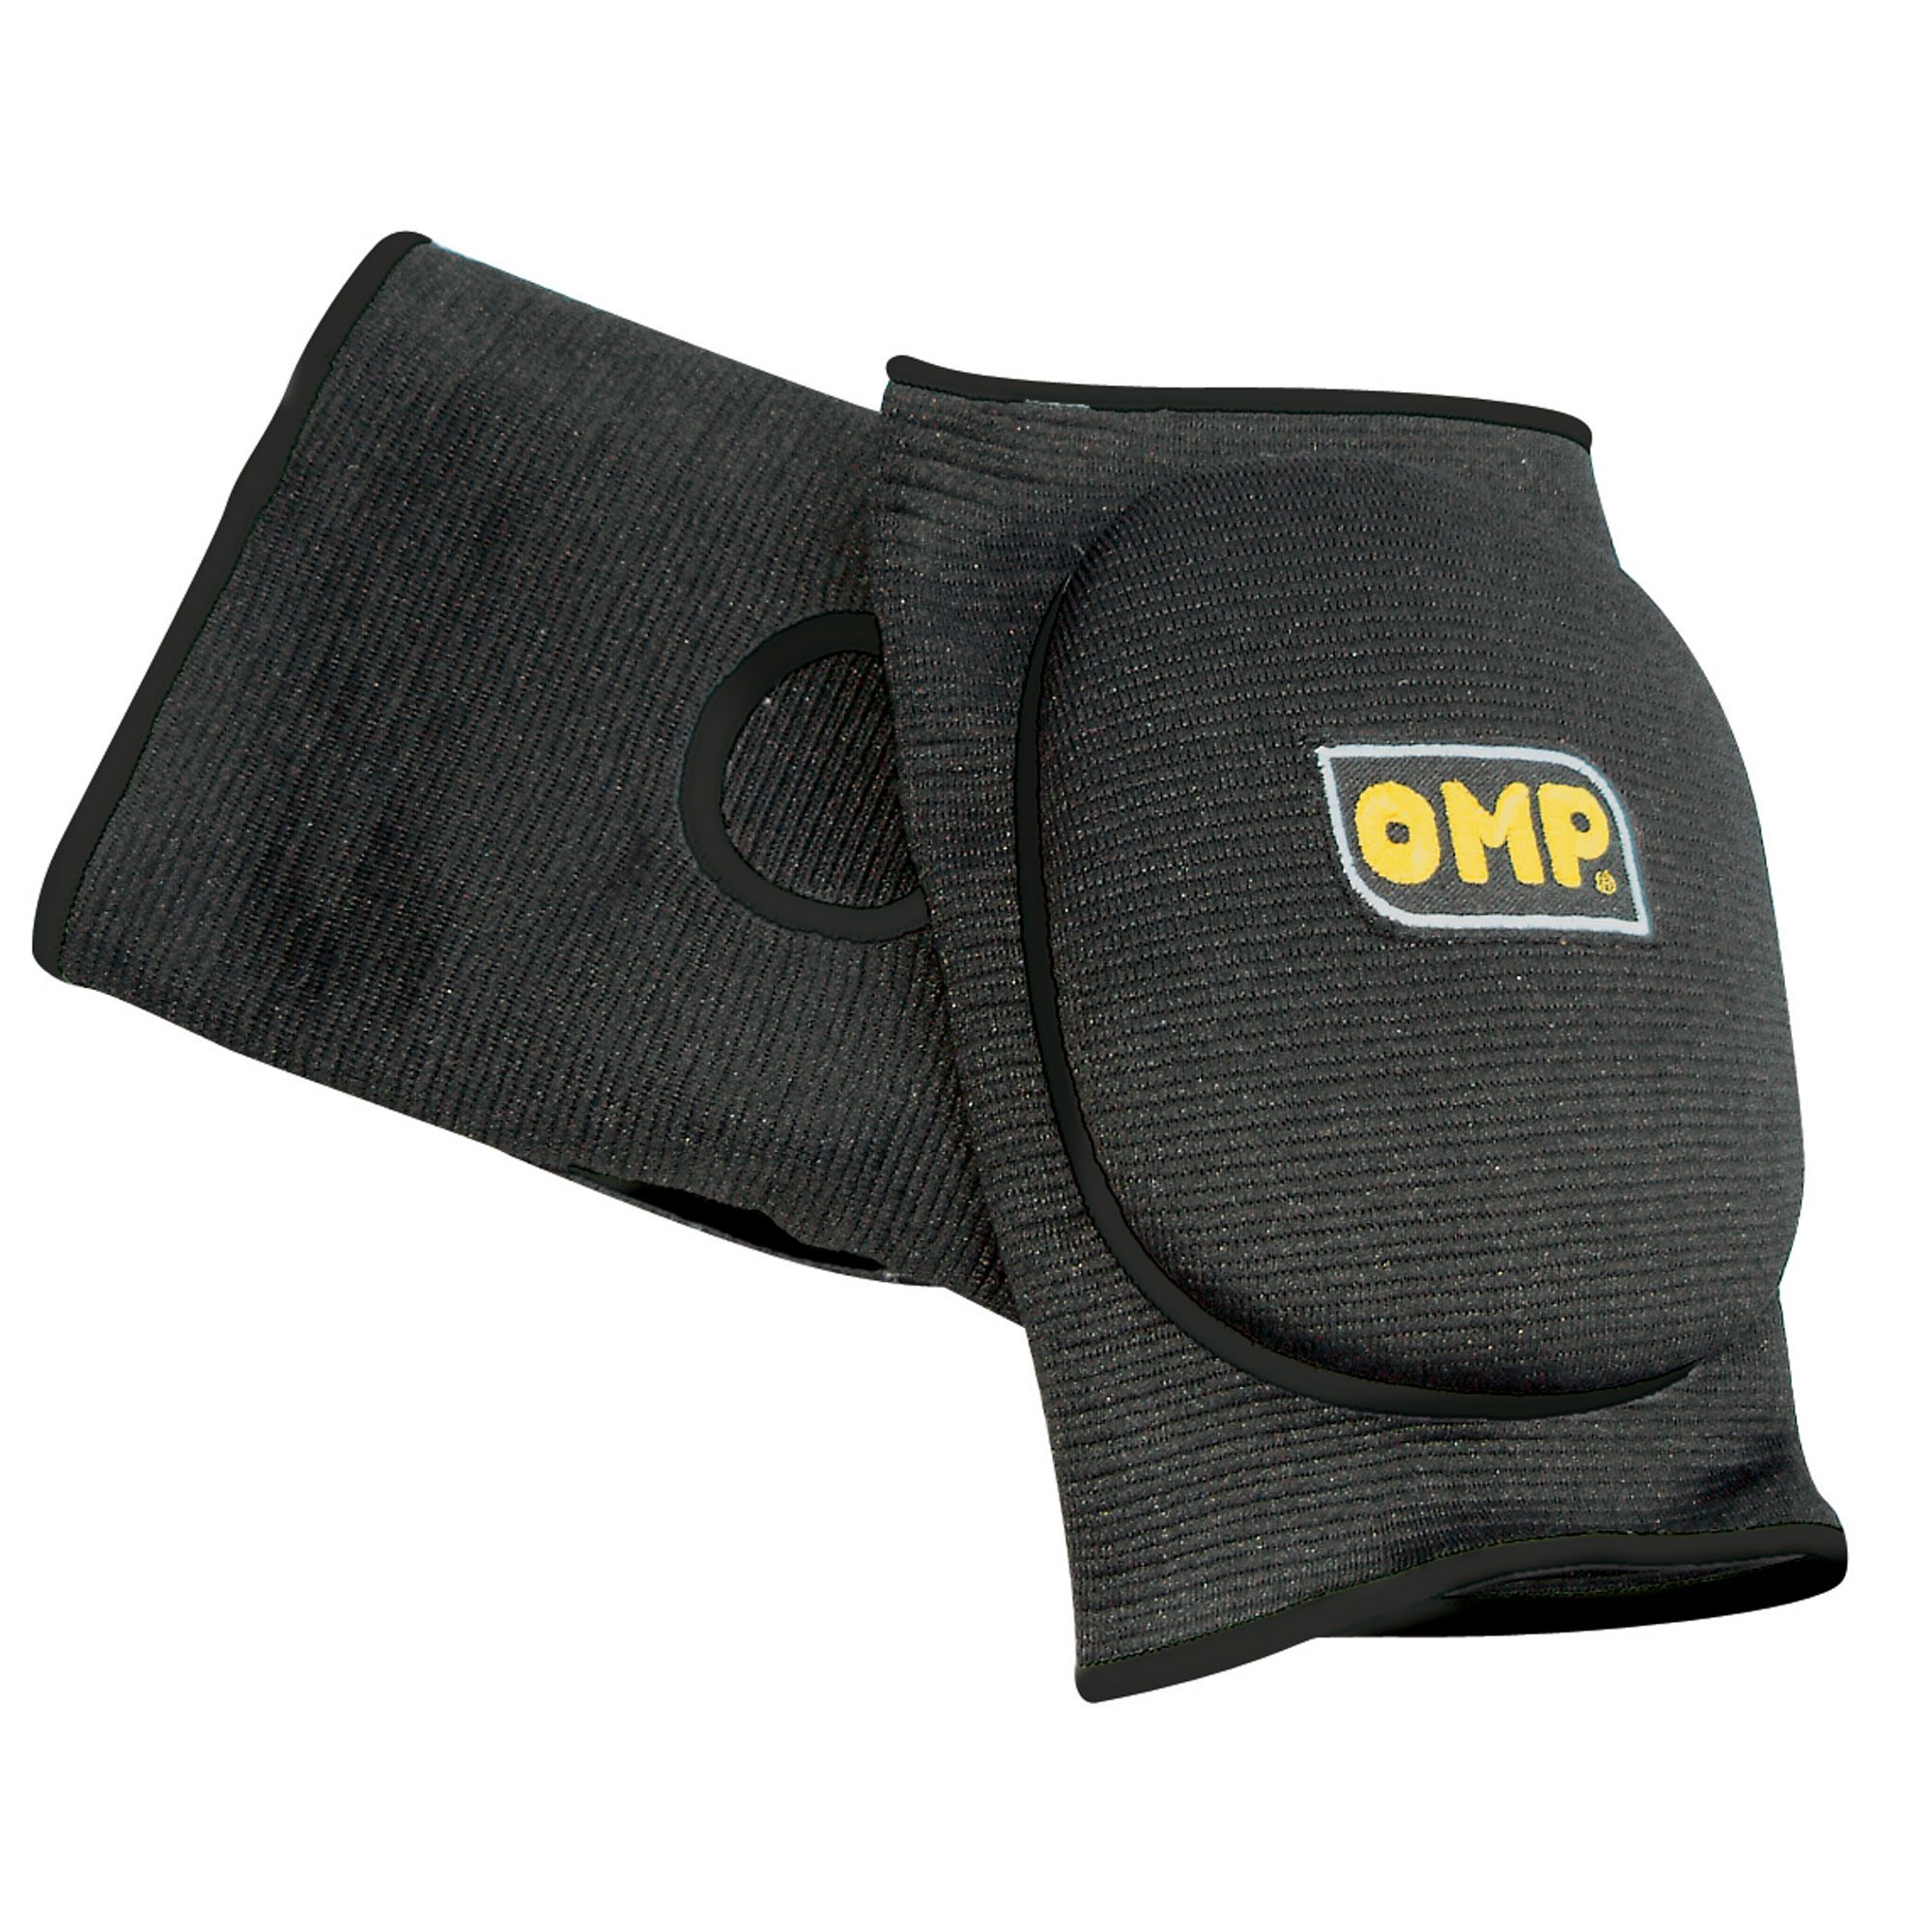 OMP Elbow Pads